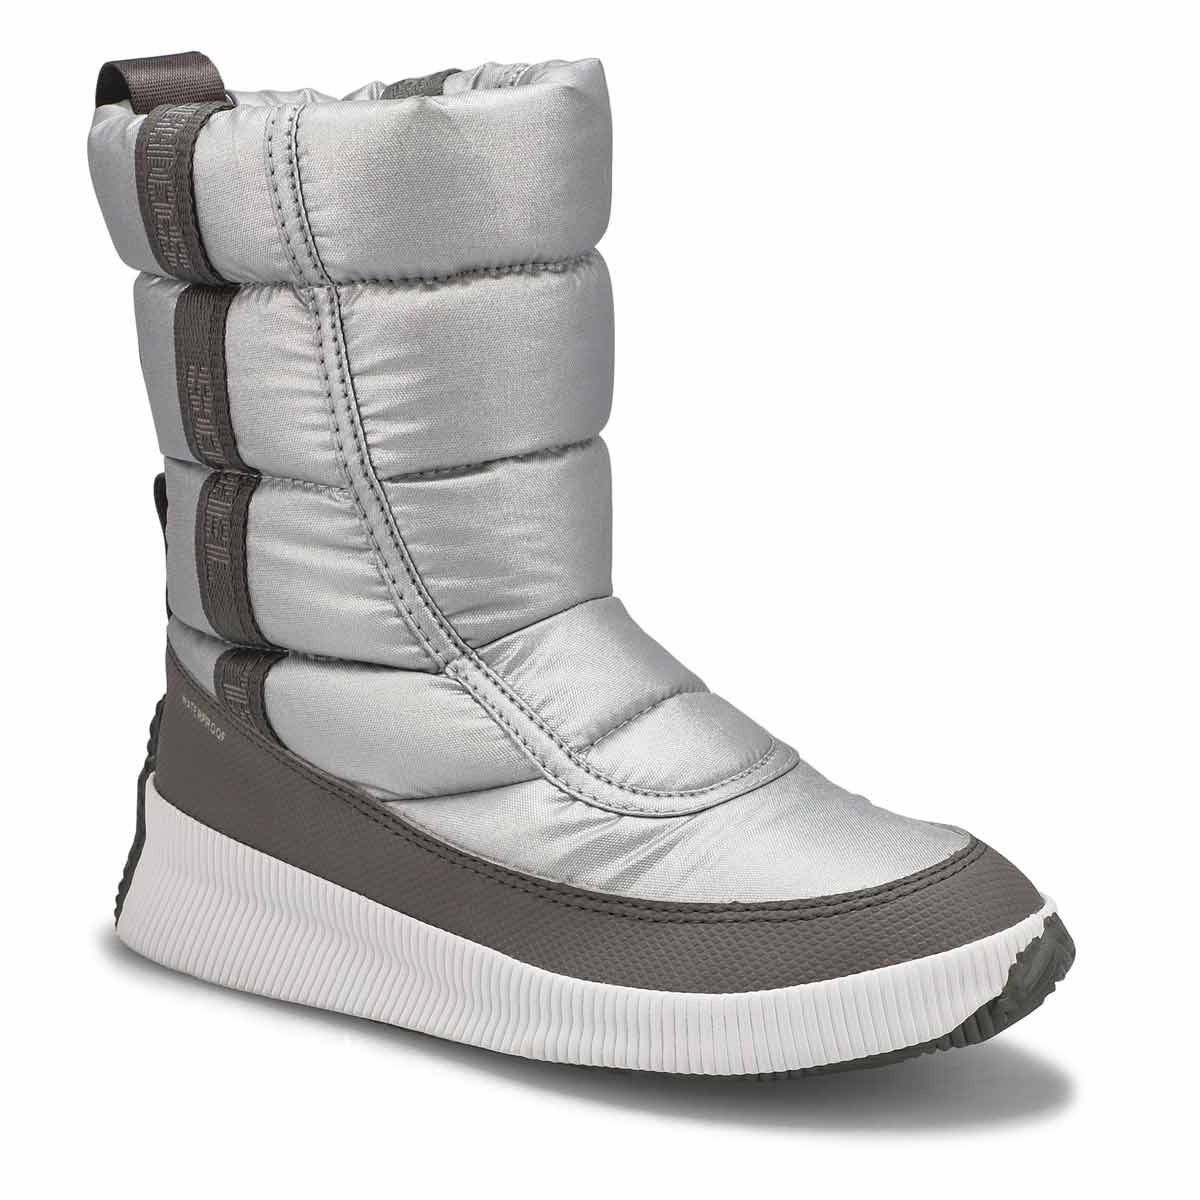 Bottes OUT'N'ABOUT PUFFY MID argent, femmes